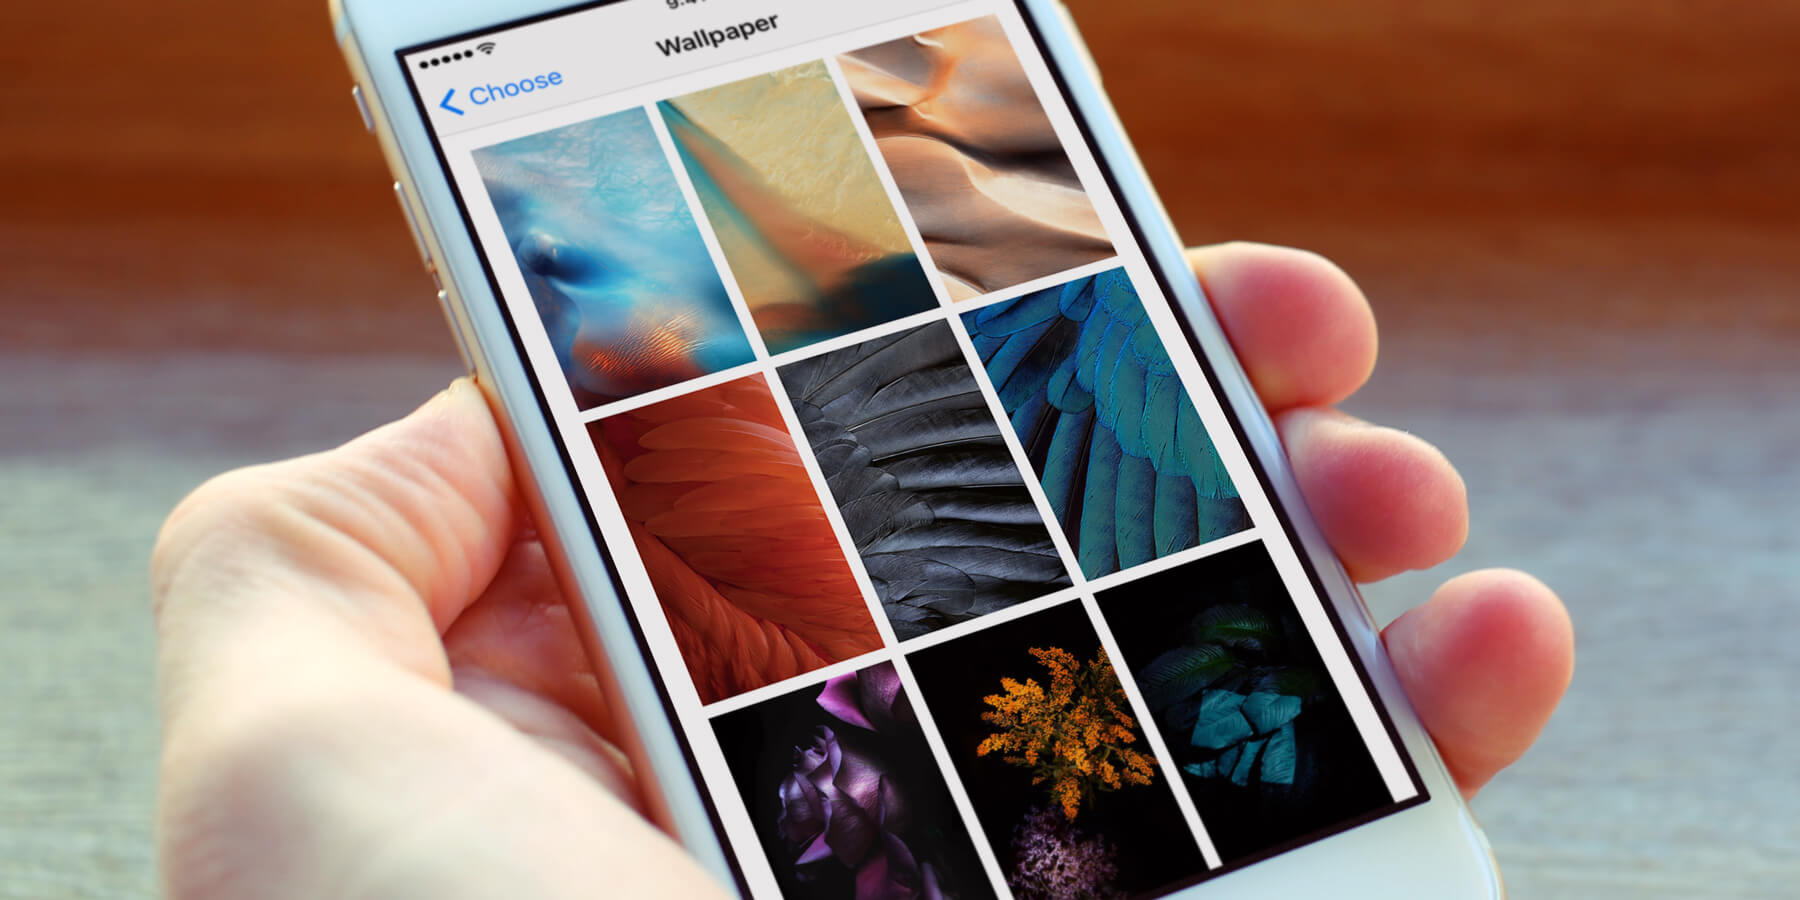 Guide: How to change your iPhone wallpaper | iOS 9 - TapSmart